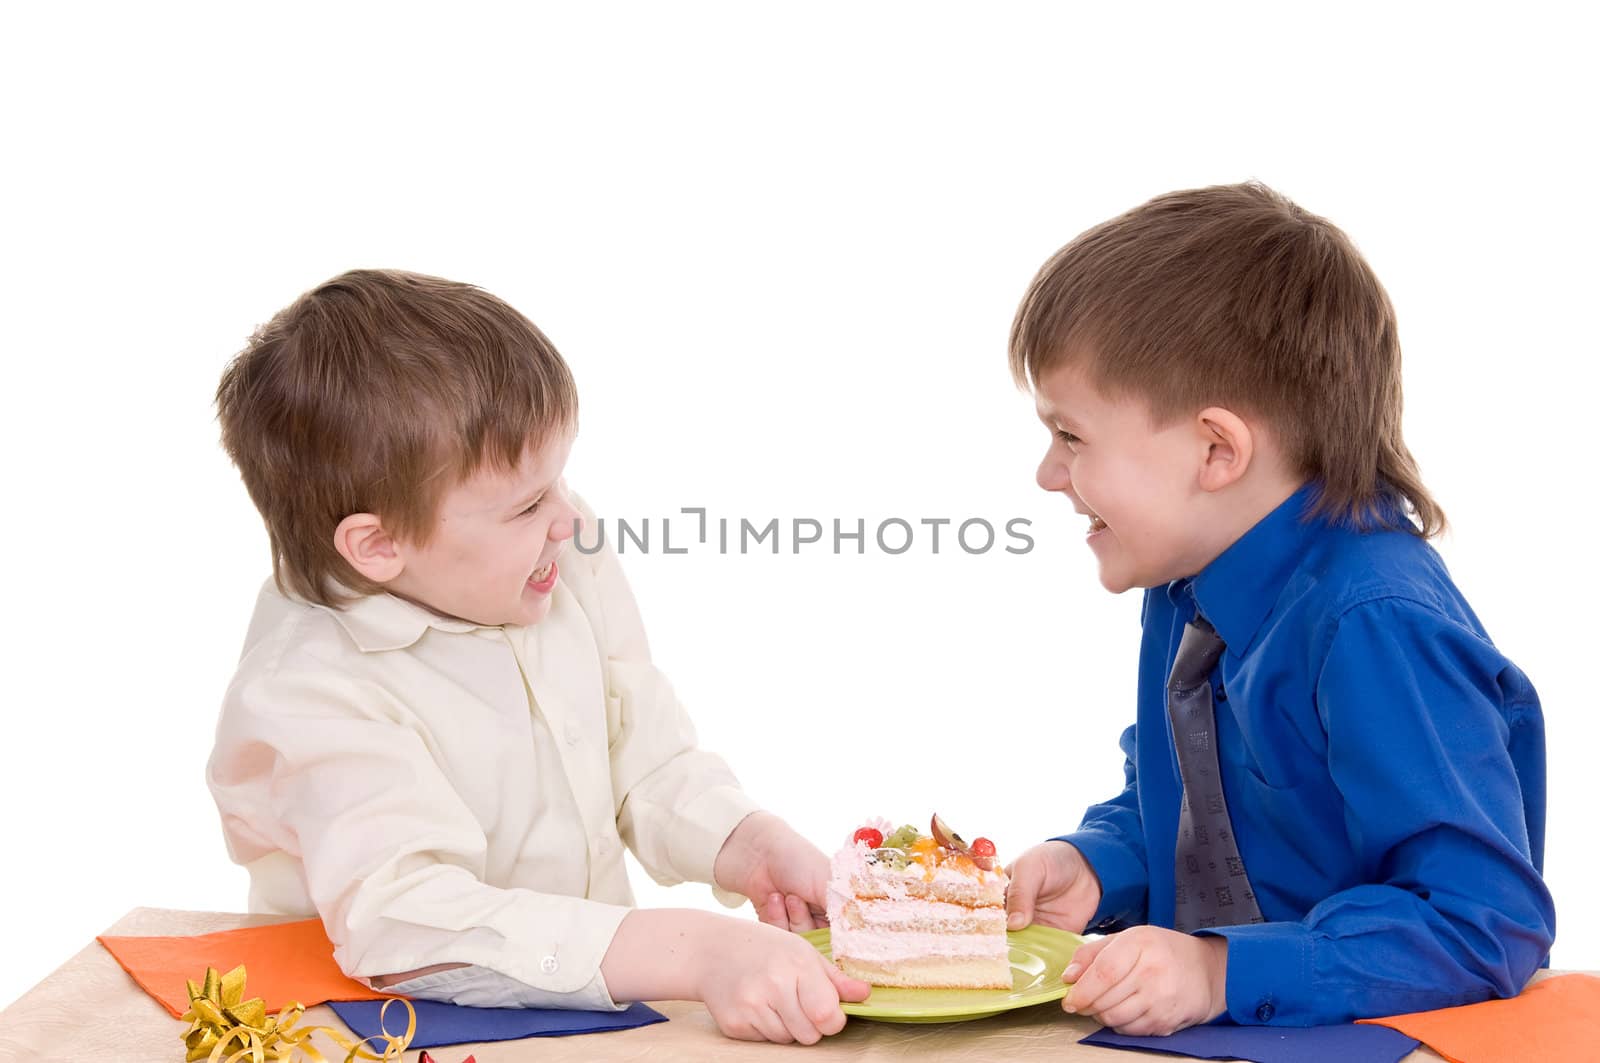 Two boys share a piece of cake on white background